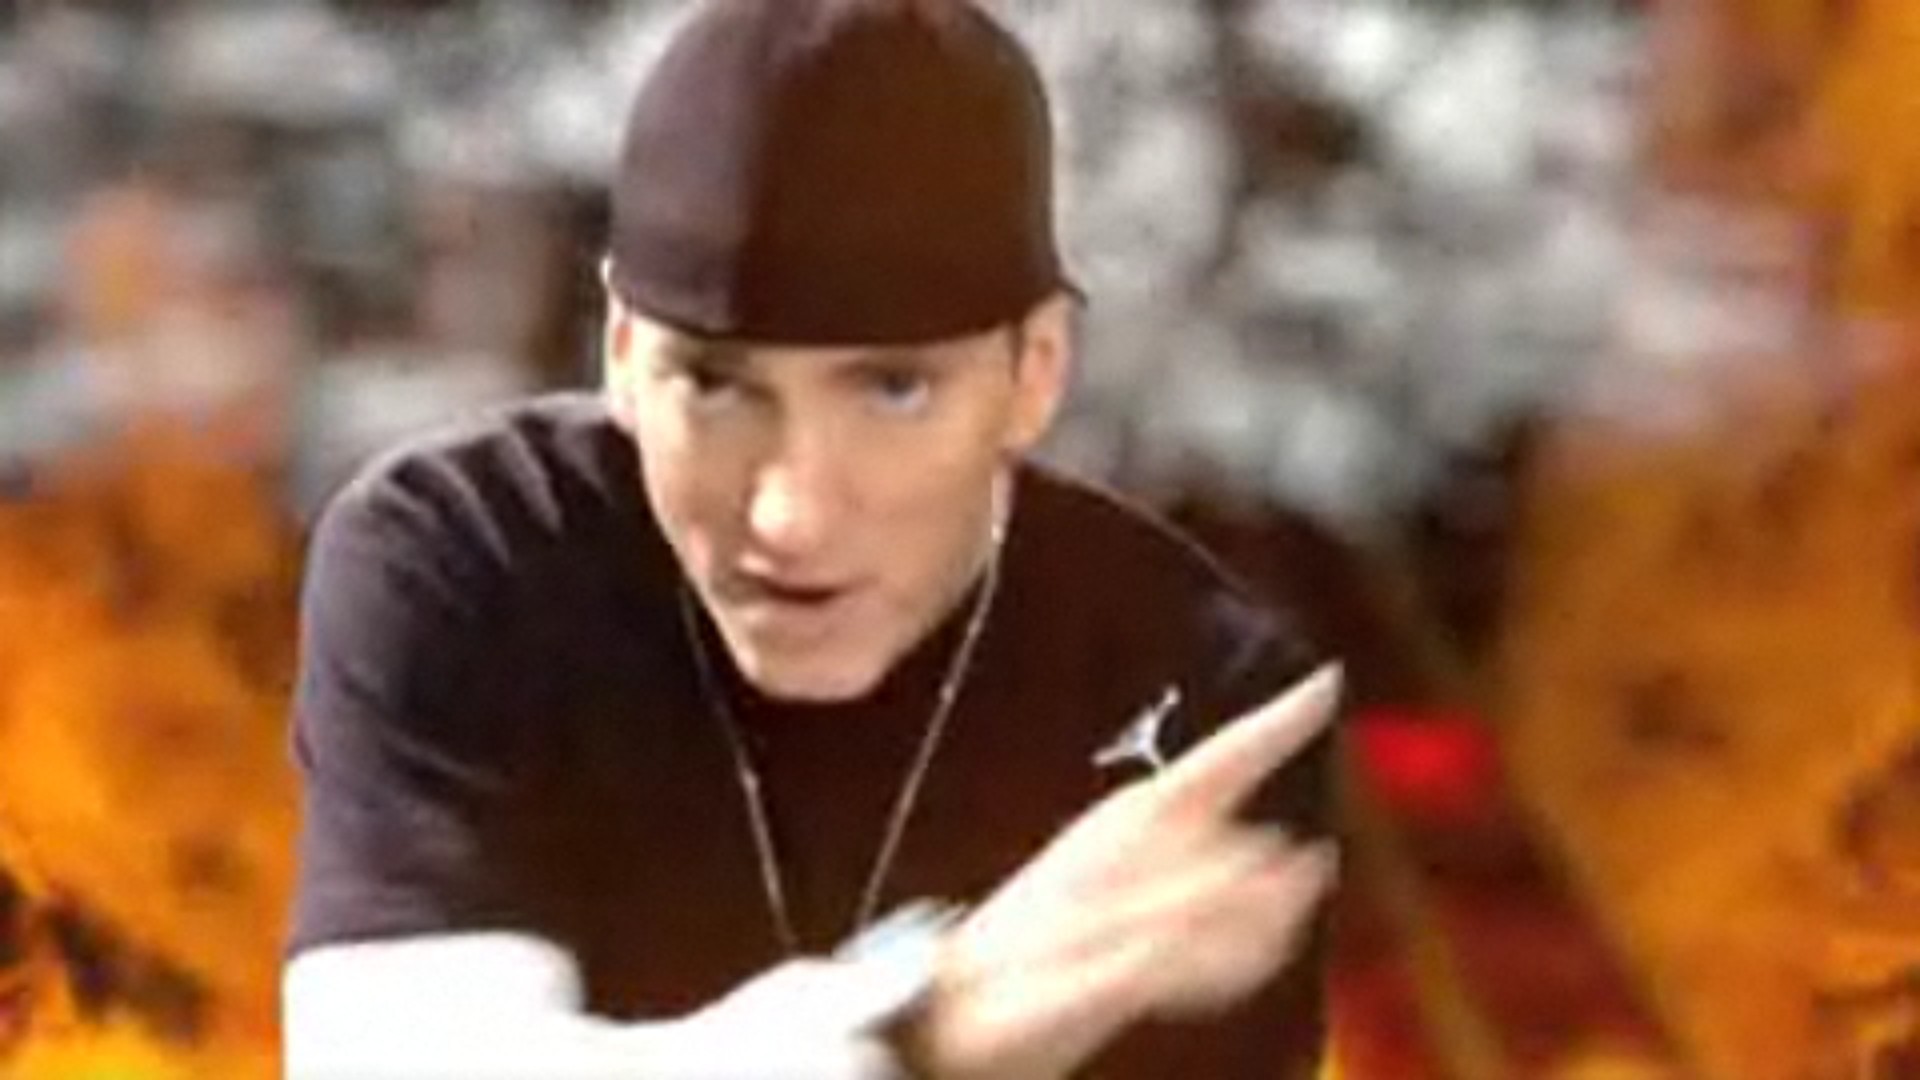 1920x1080 Eminem and The Gang images Eminem and D12 HD wallpaper and background photos